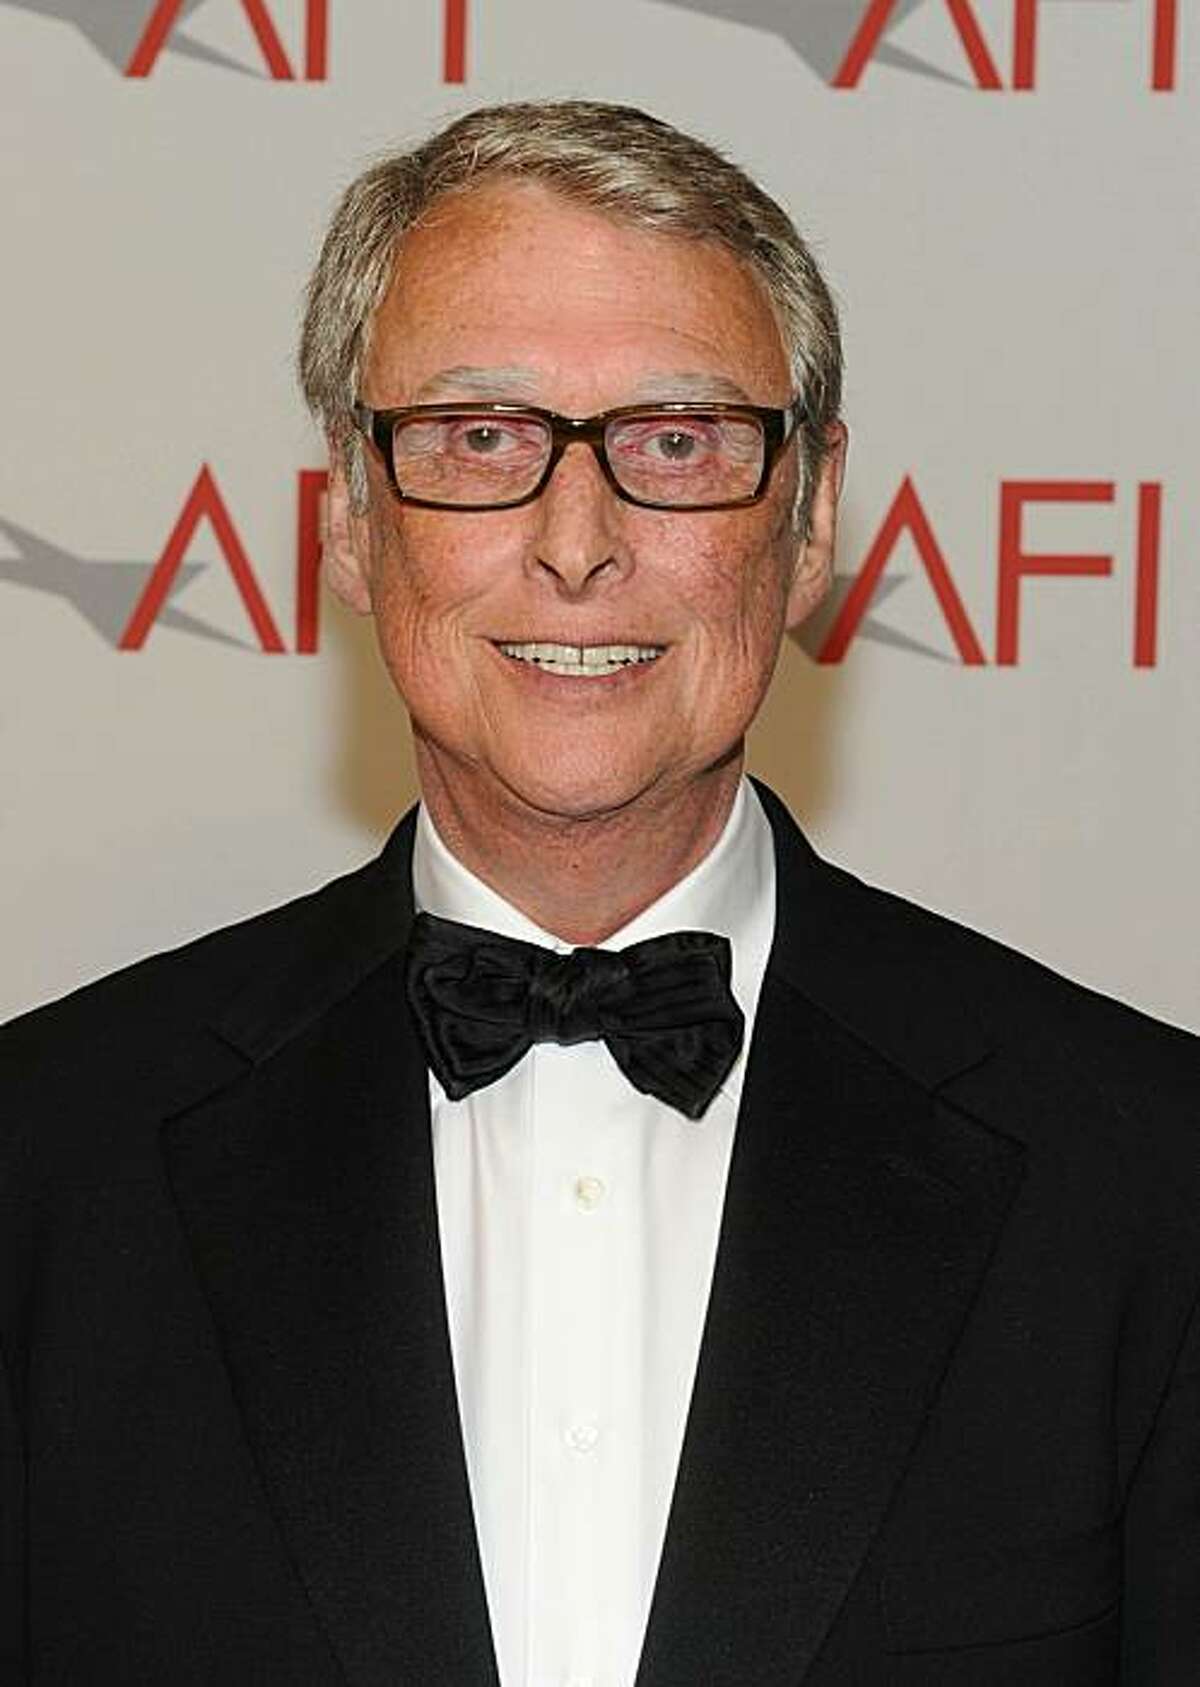 CULVER CITY, CA - JUNE 10: Honoree Mike Nichols poses with his Life Achievement Award at the 38th AFI Life Achievement Award honoring Mike Nichols held at Sony Pictures Studios on June 10, 2010 in Culver City, California. The AFI Life Achievement Award tribute to Mike Nichols will premiere on TV Land on Saturday, June 25 at 9PM ET/PST. (Photo by Frazer Harrison/Getty Images for AFI)